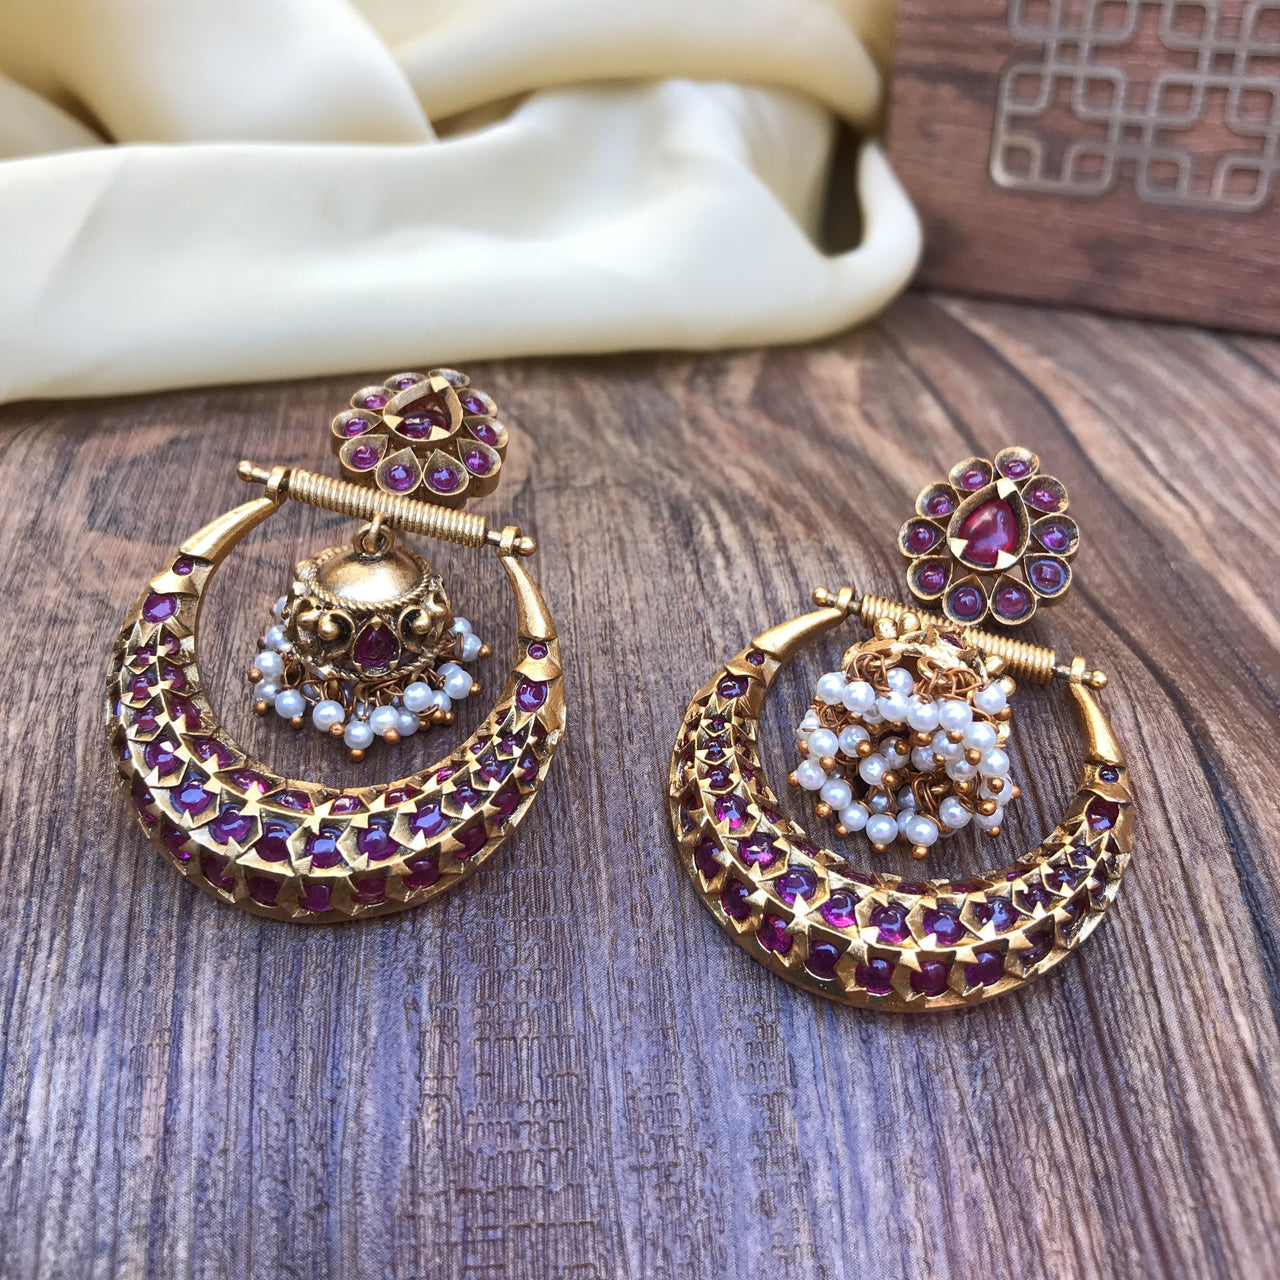 Buy South Indian Gold Traditional Big Earrings for Wedding